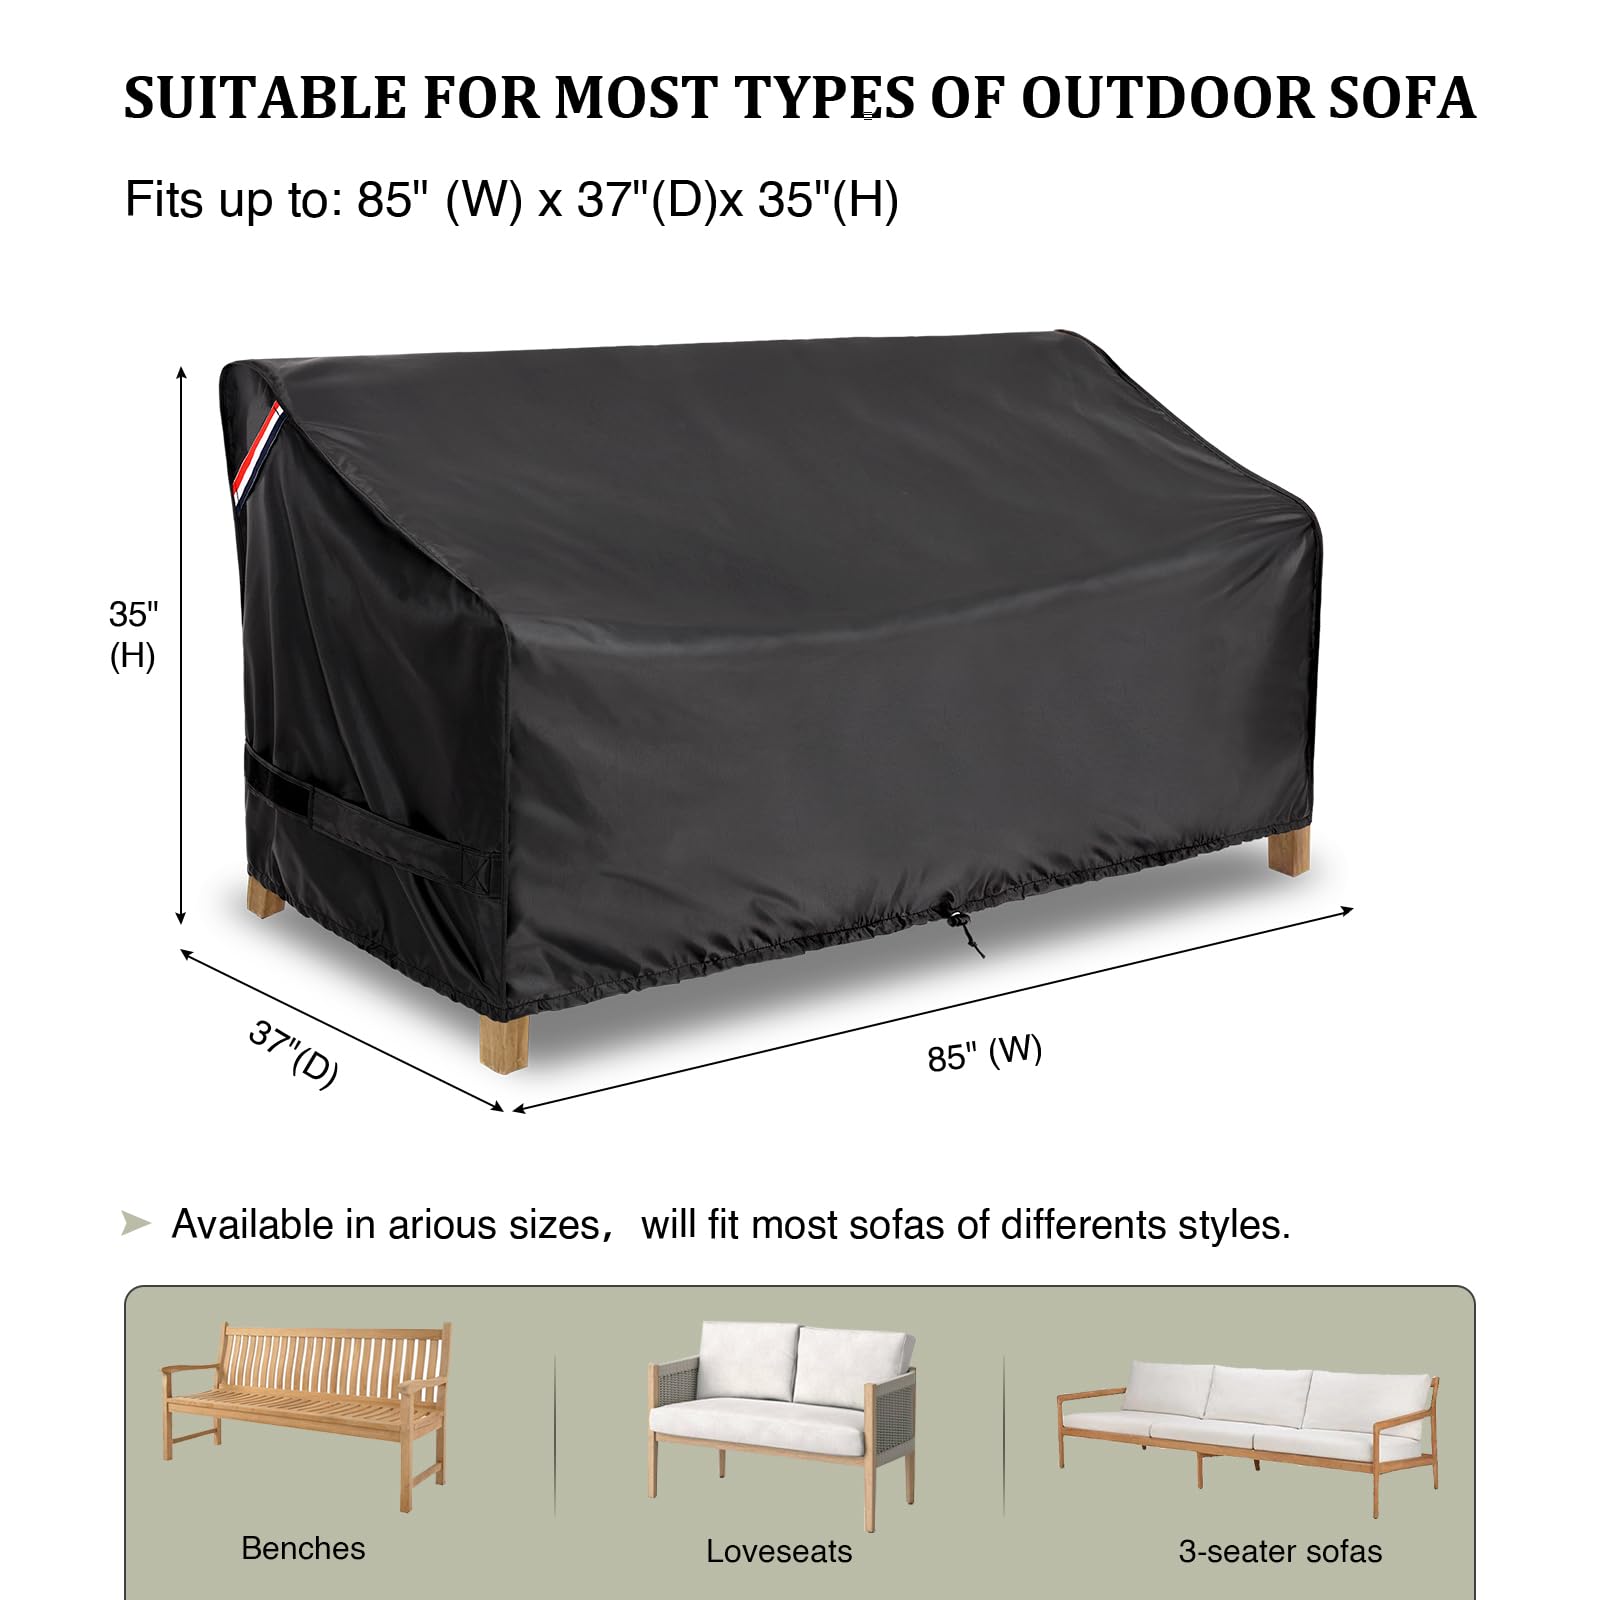 KylinLucky Outdoor Furniture Covers Waterproof,3-Seate Patio Sofa Covers Fits up to 85W x 37D x 35H inches Black